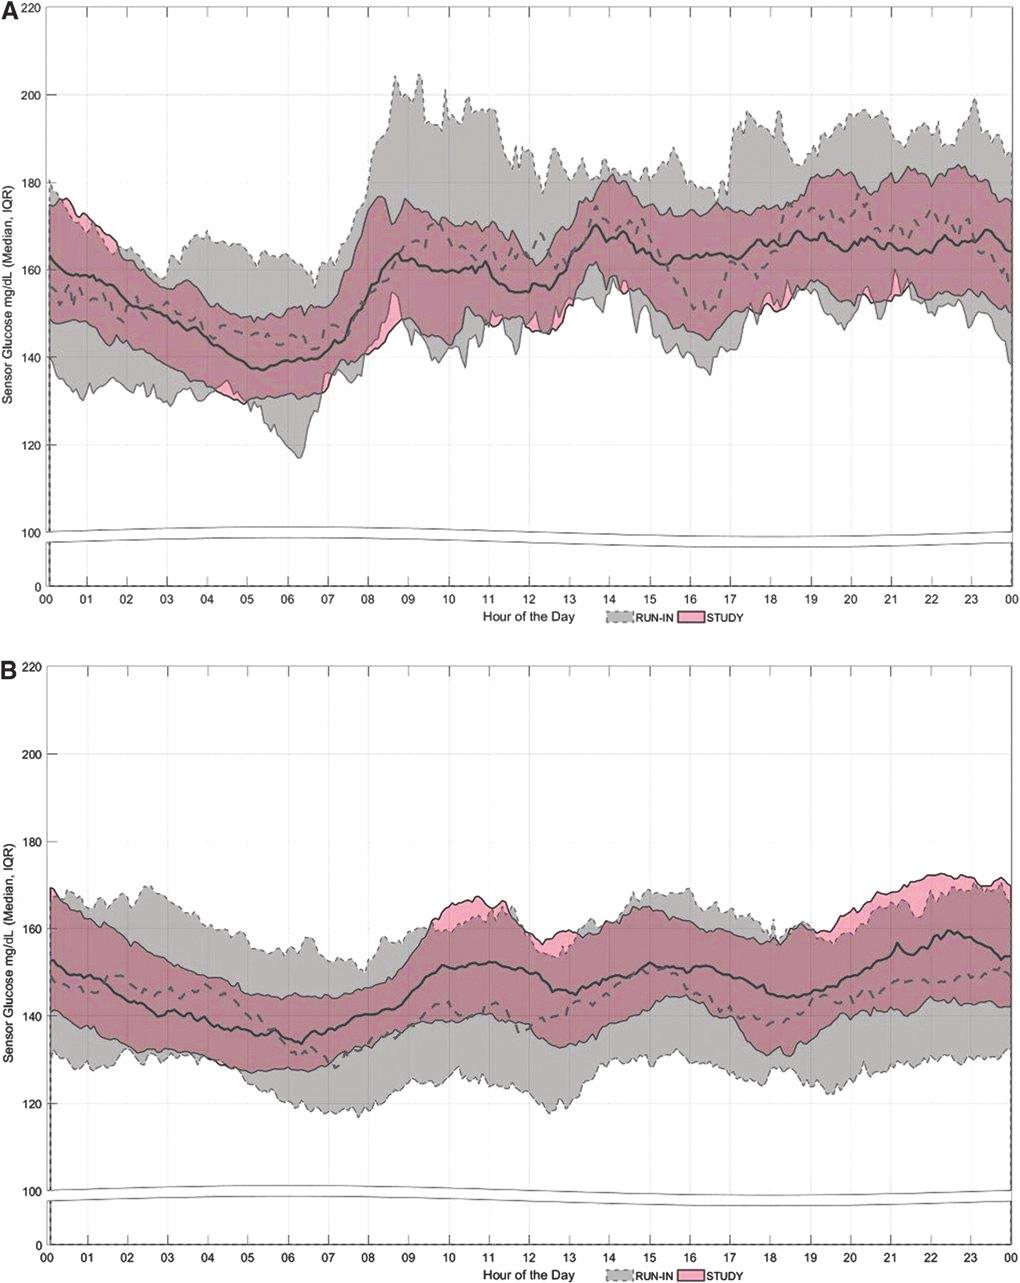 158 GARG ET AL. FIG. 1. Sensor glucose profiles during the run-in and study phase.